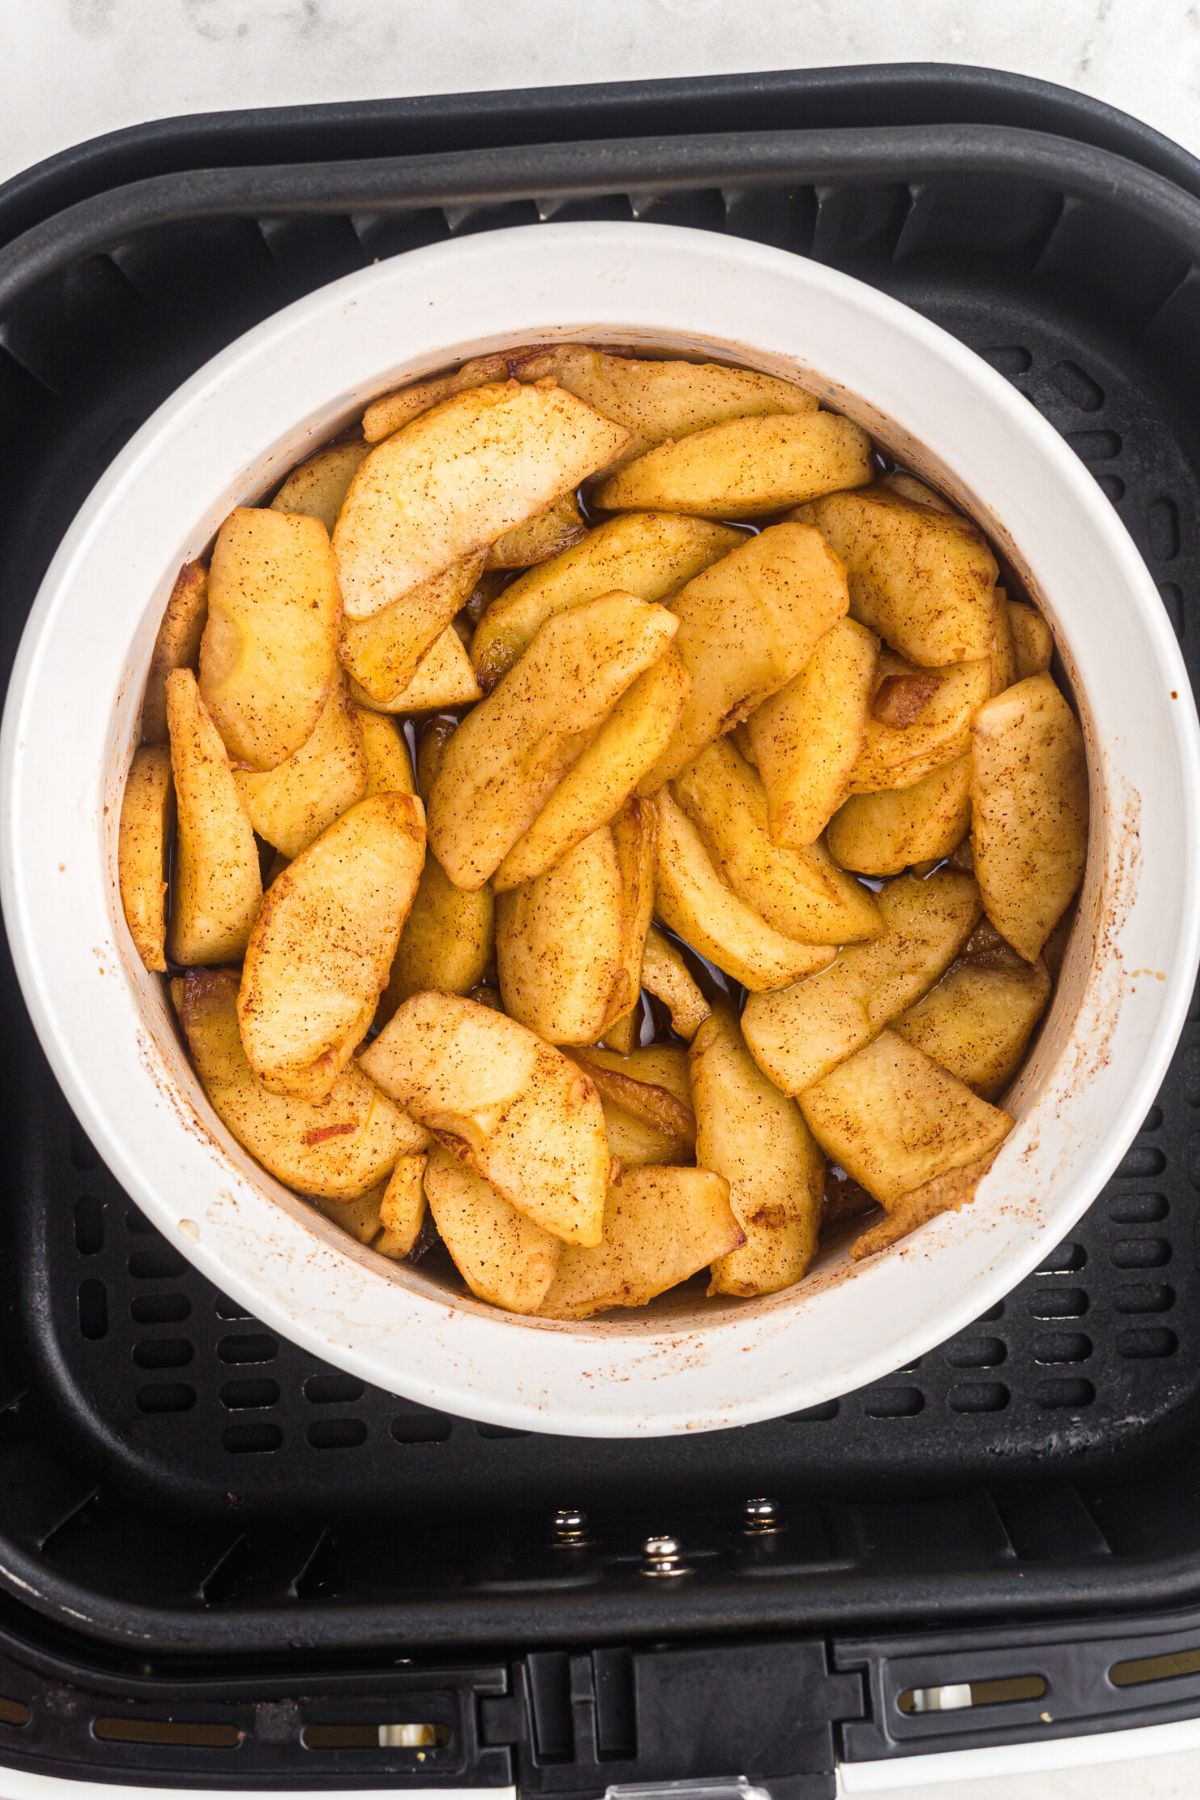 Golden juicy apple slices in a white bowl in the air fryer basket after being cooked